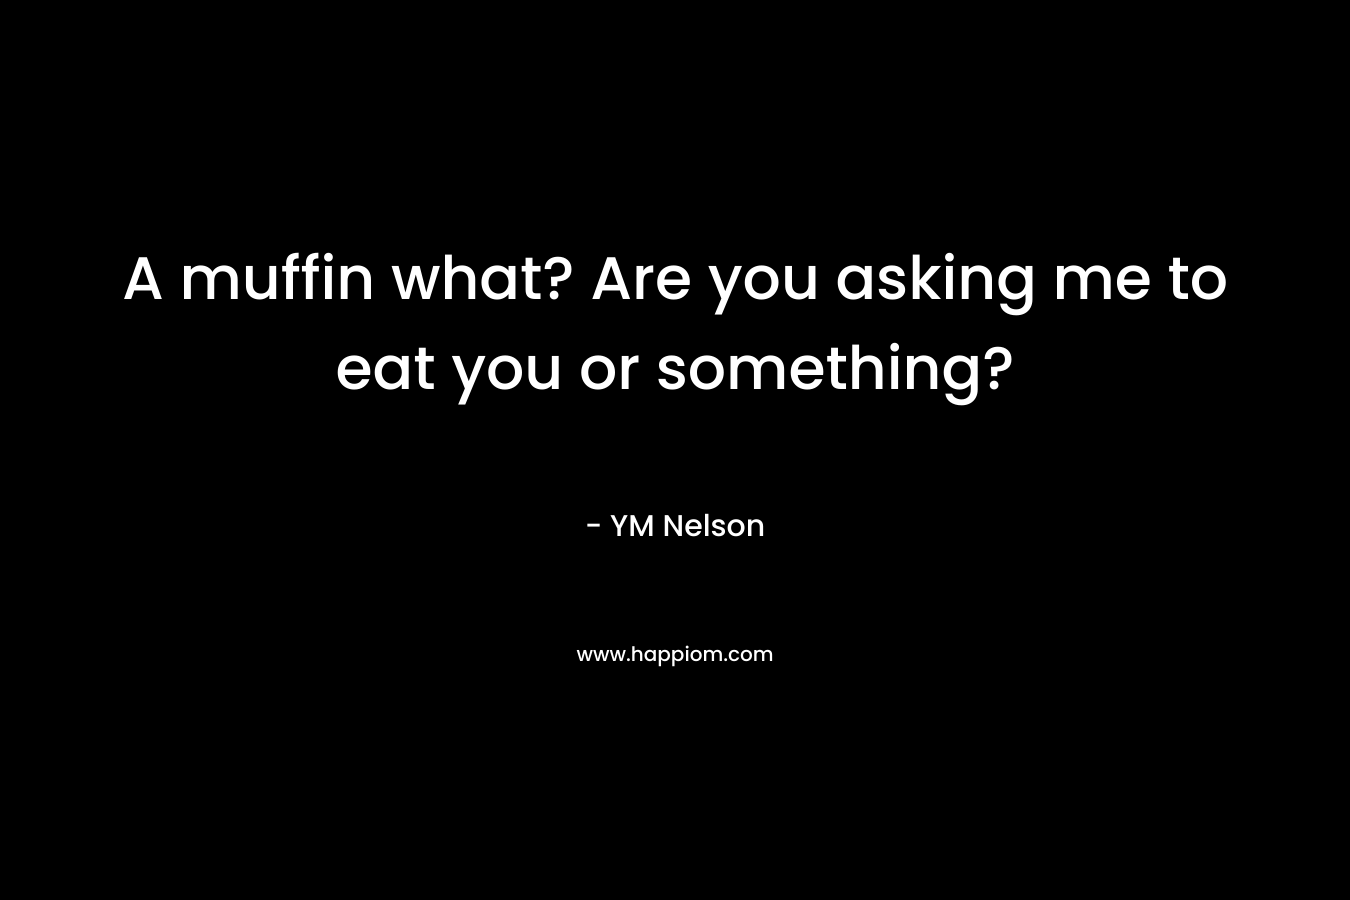 A muffin what? Are you asking me to eat you or something?